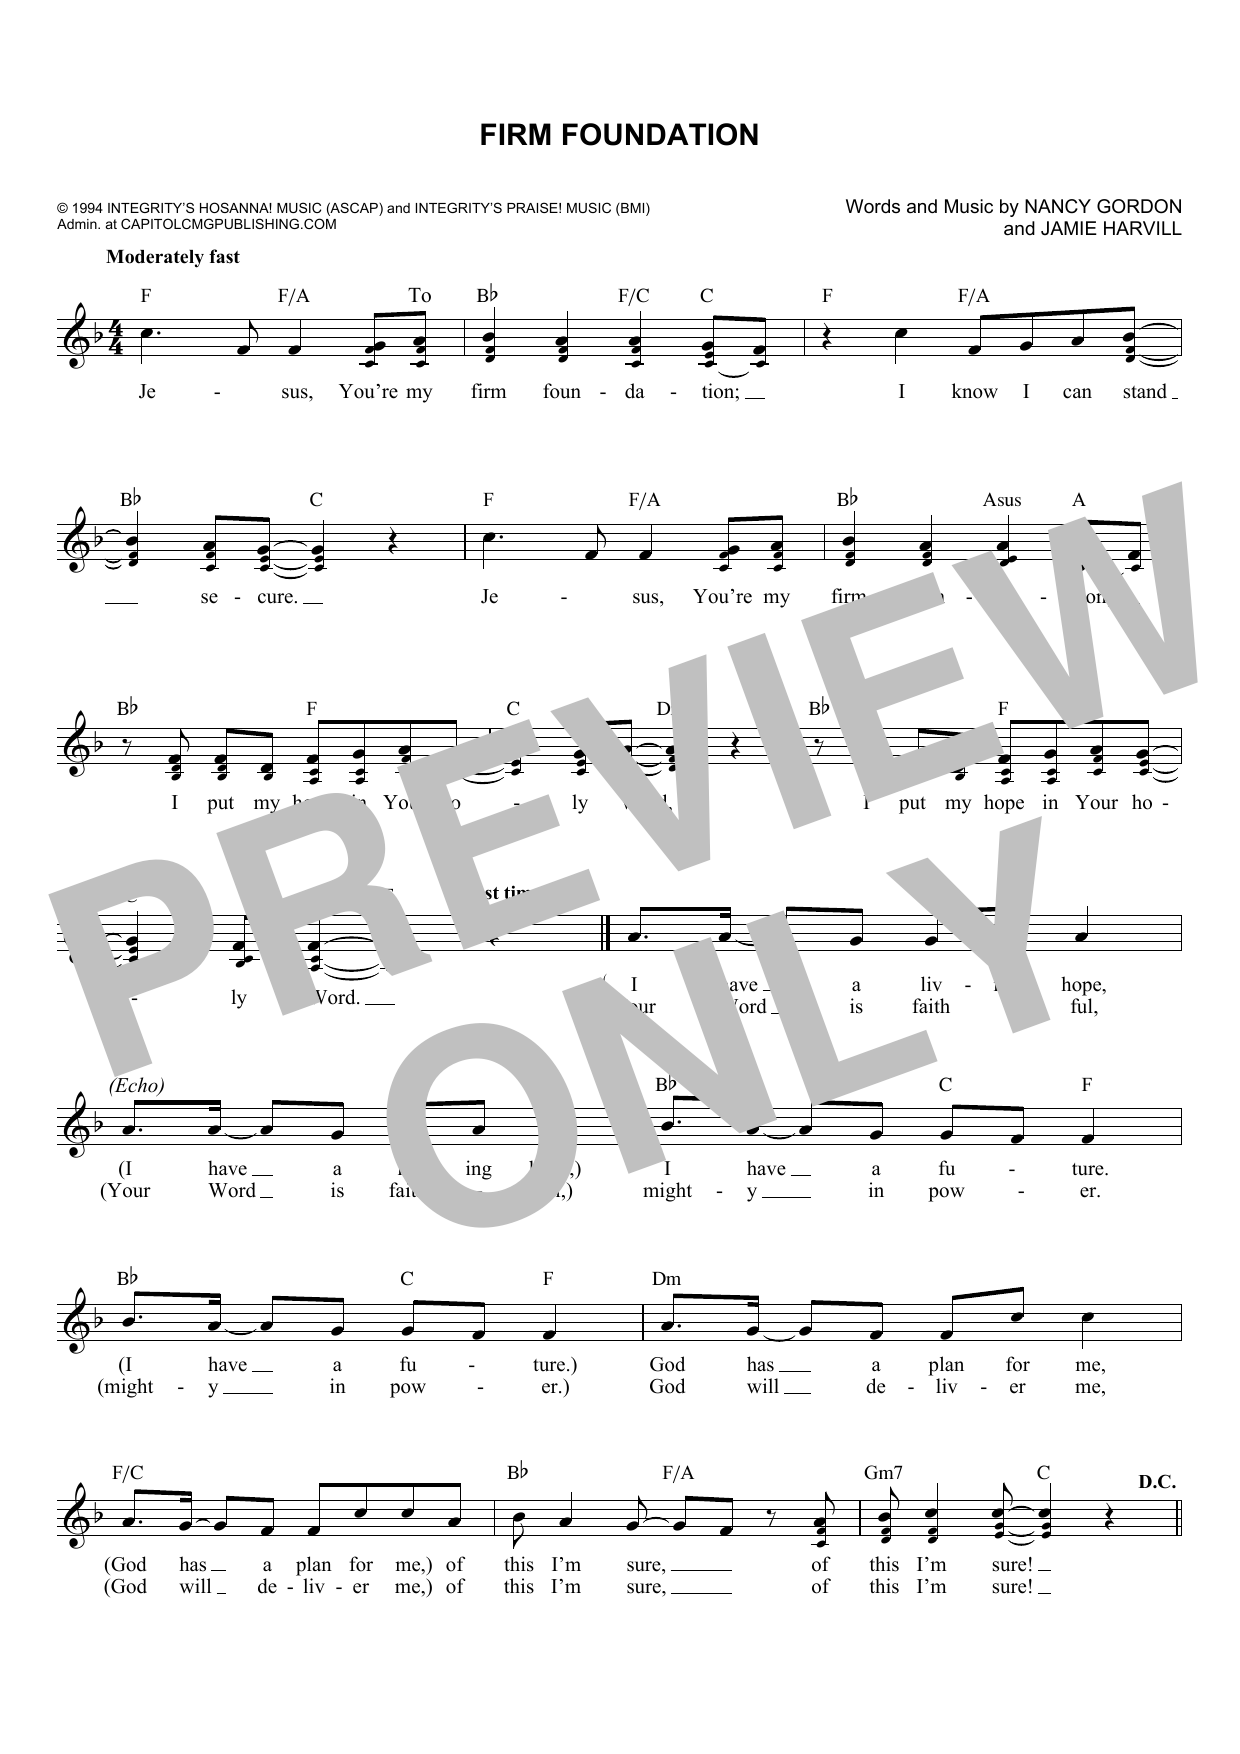 Download Jamie Harvill Firm Foundation Sheet Music